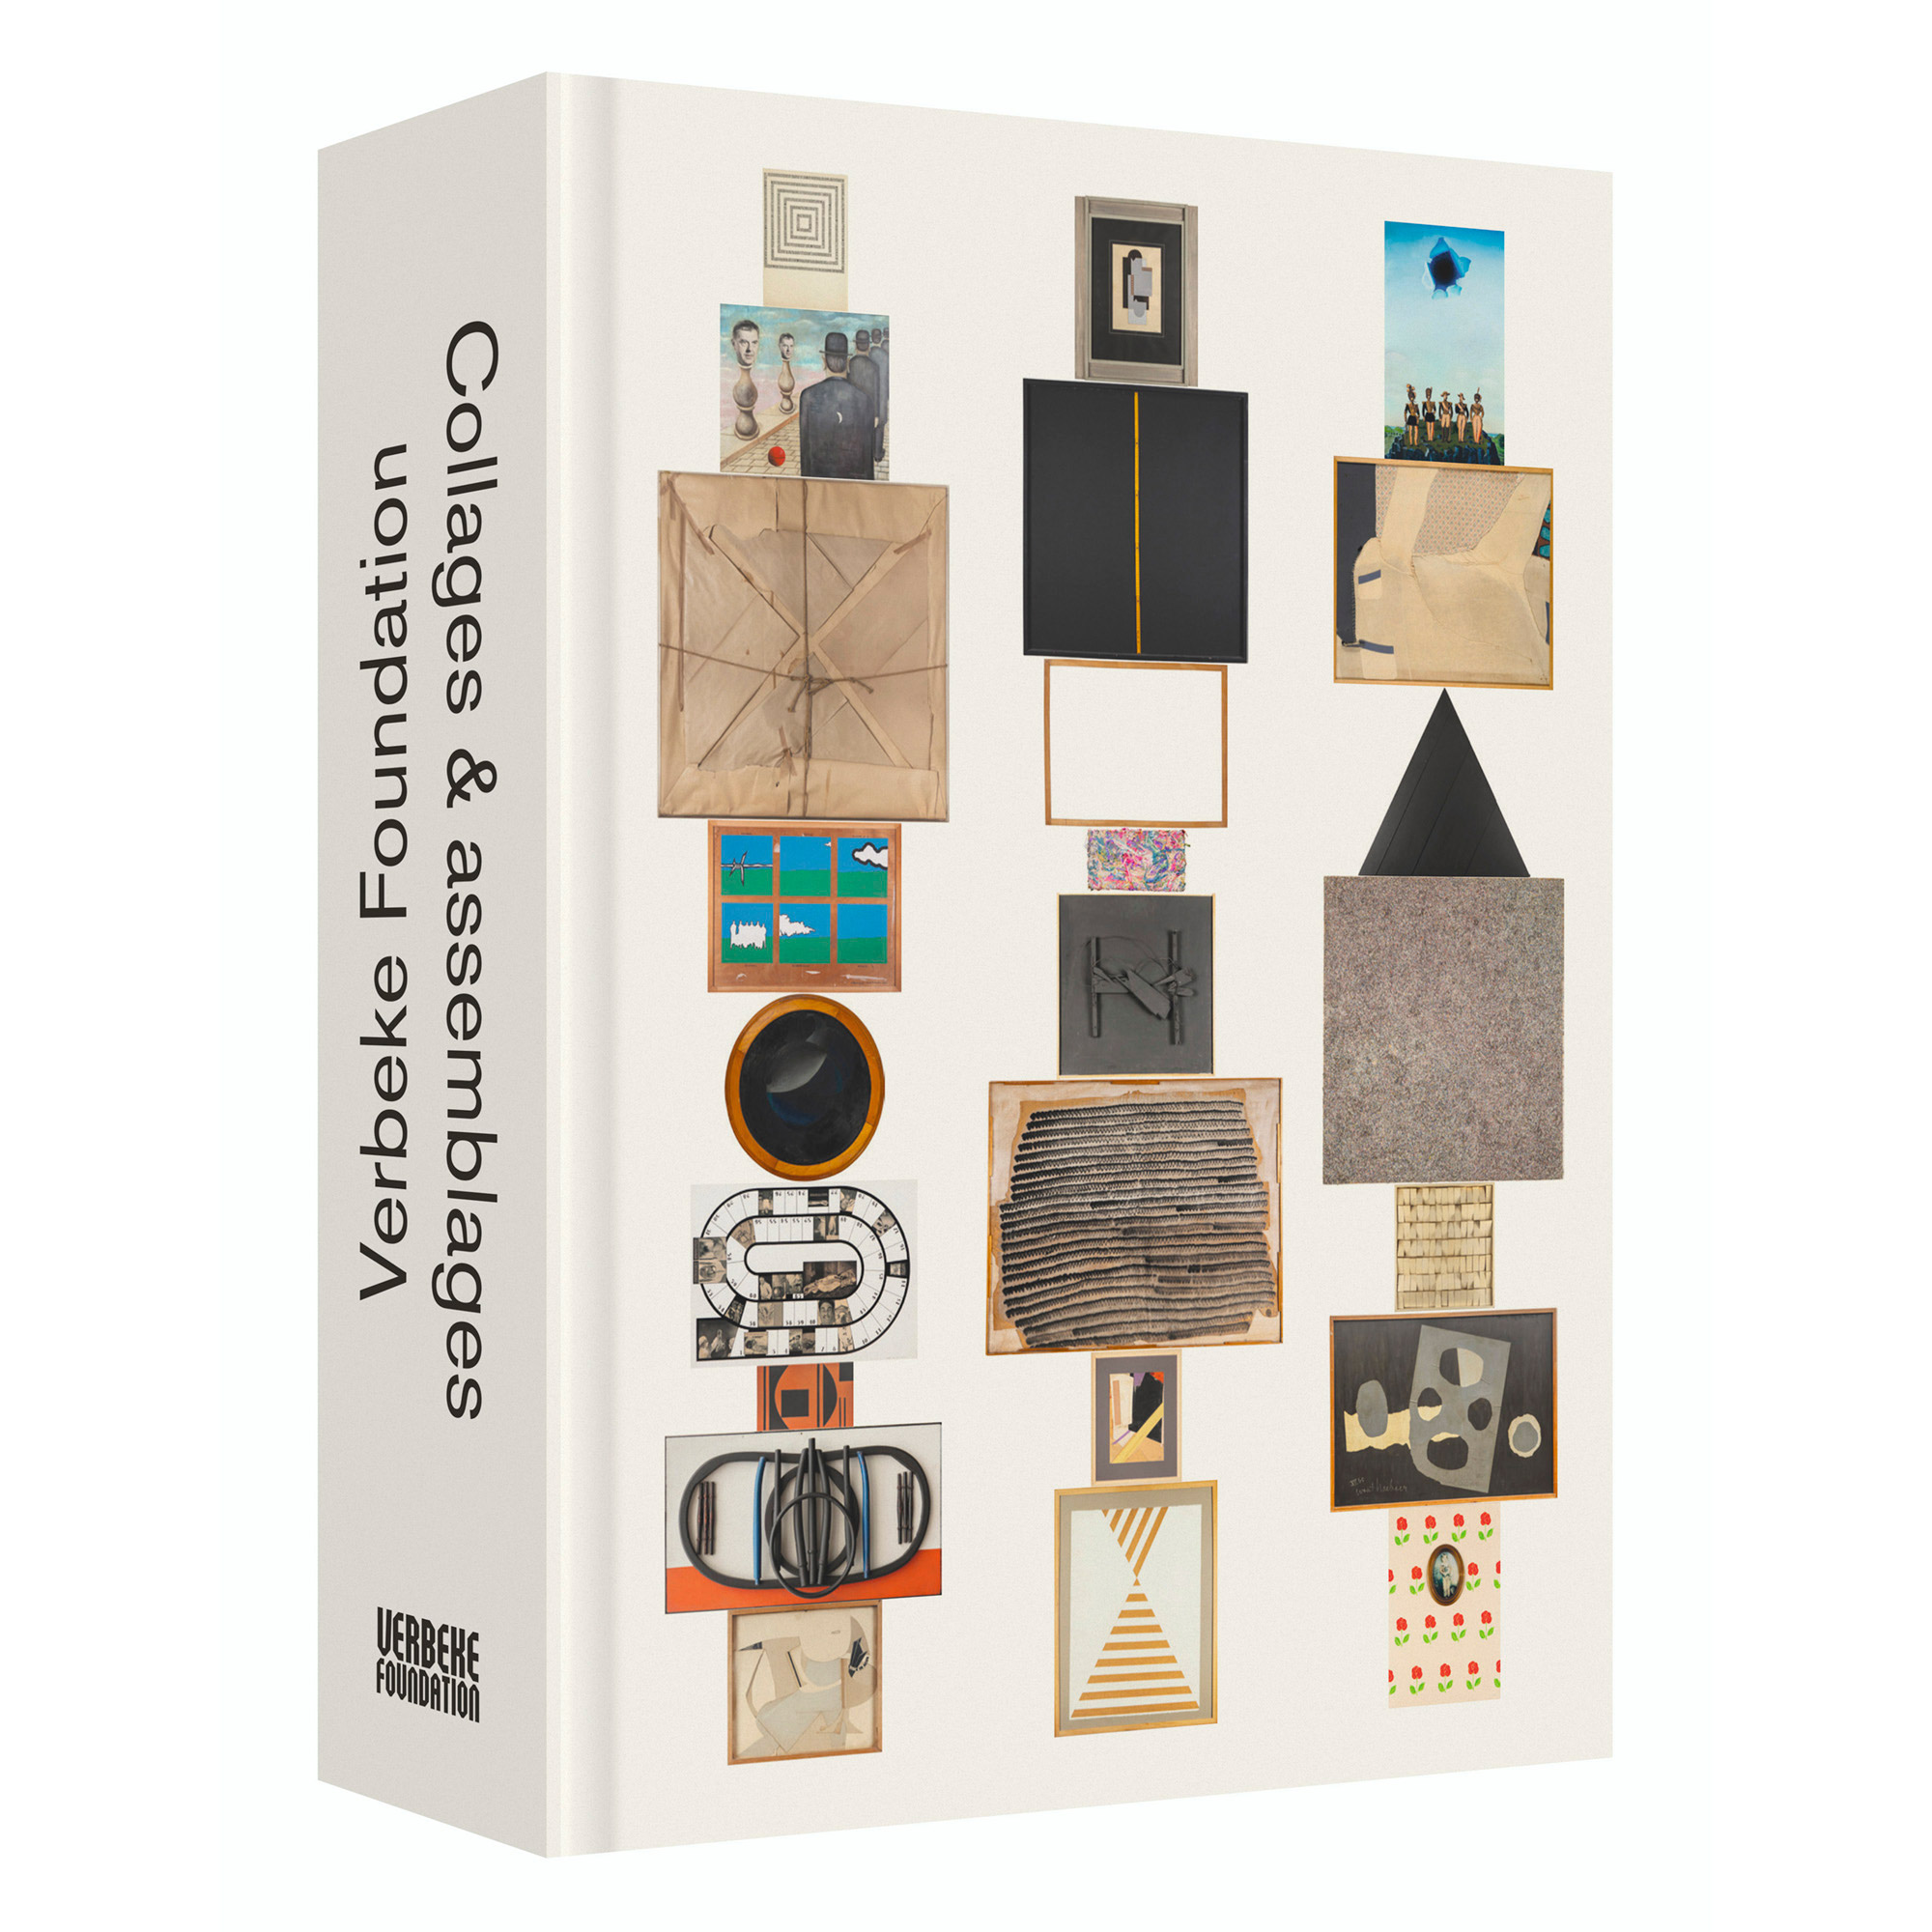 Verbeke Foundation, boekuitgave, book release, Collages & assemblages, 1008 pages, de collectie